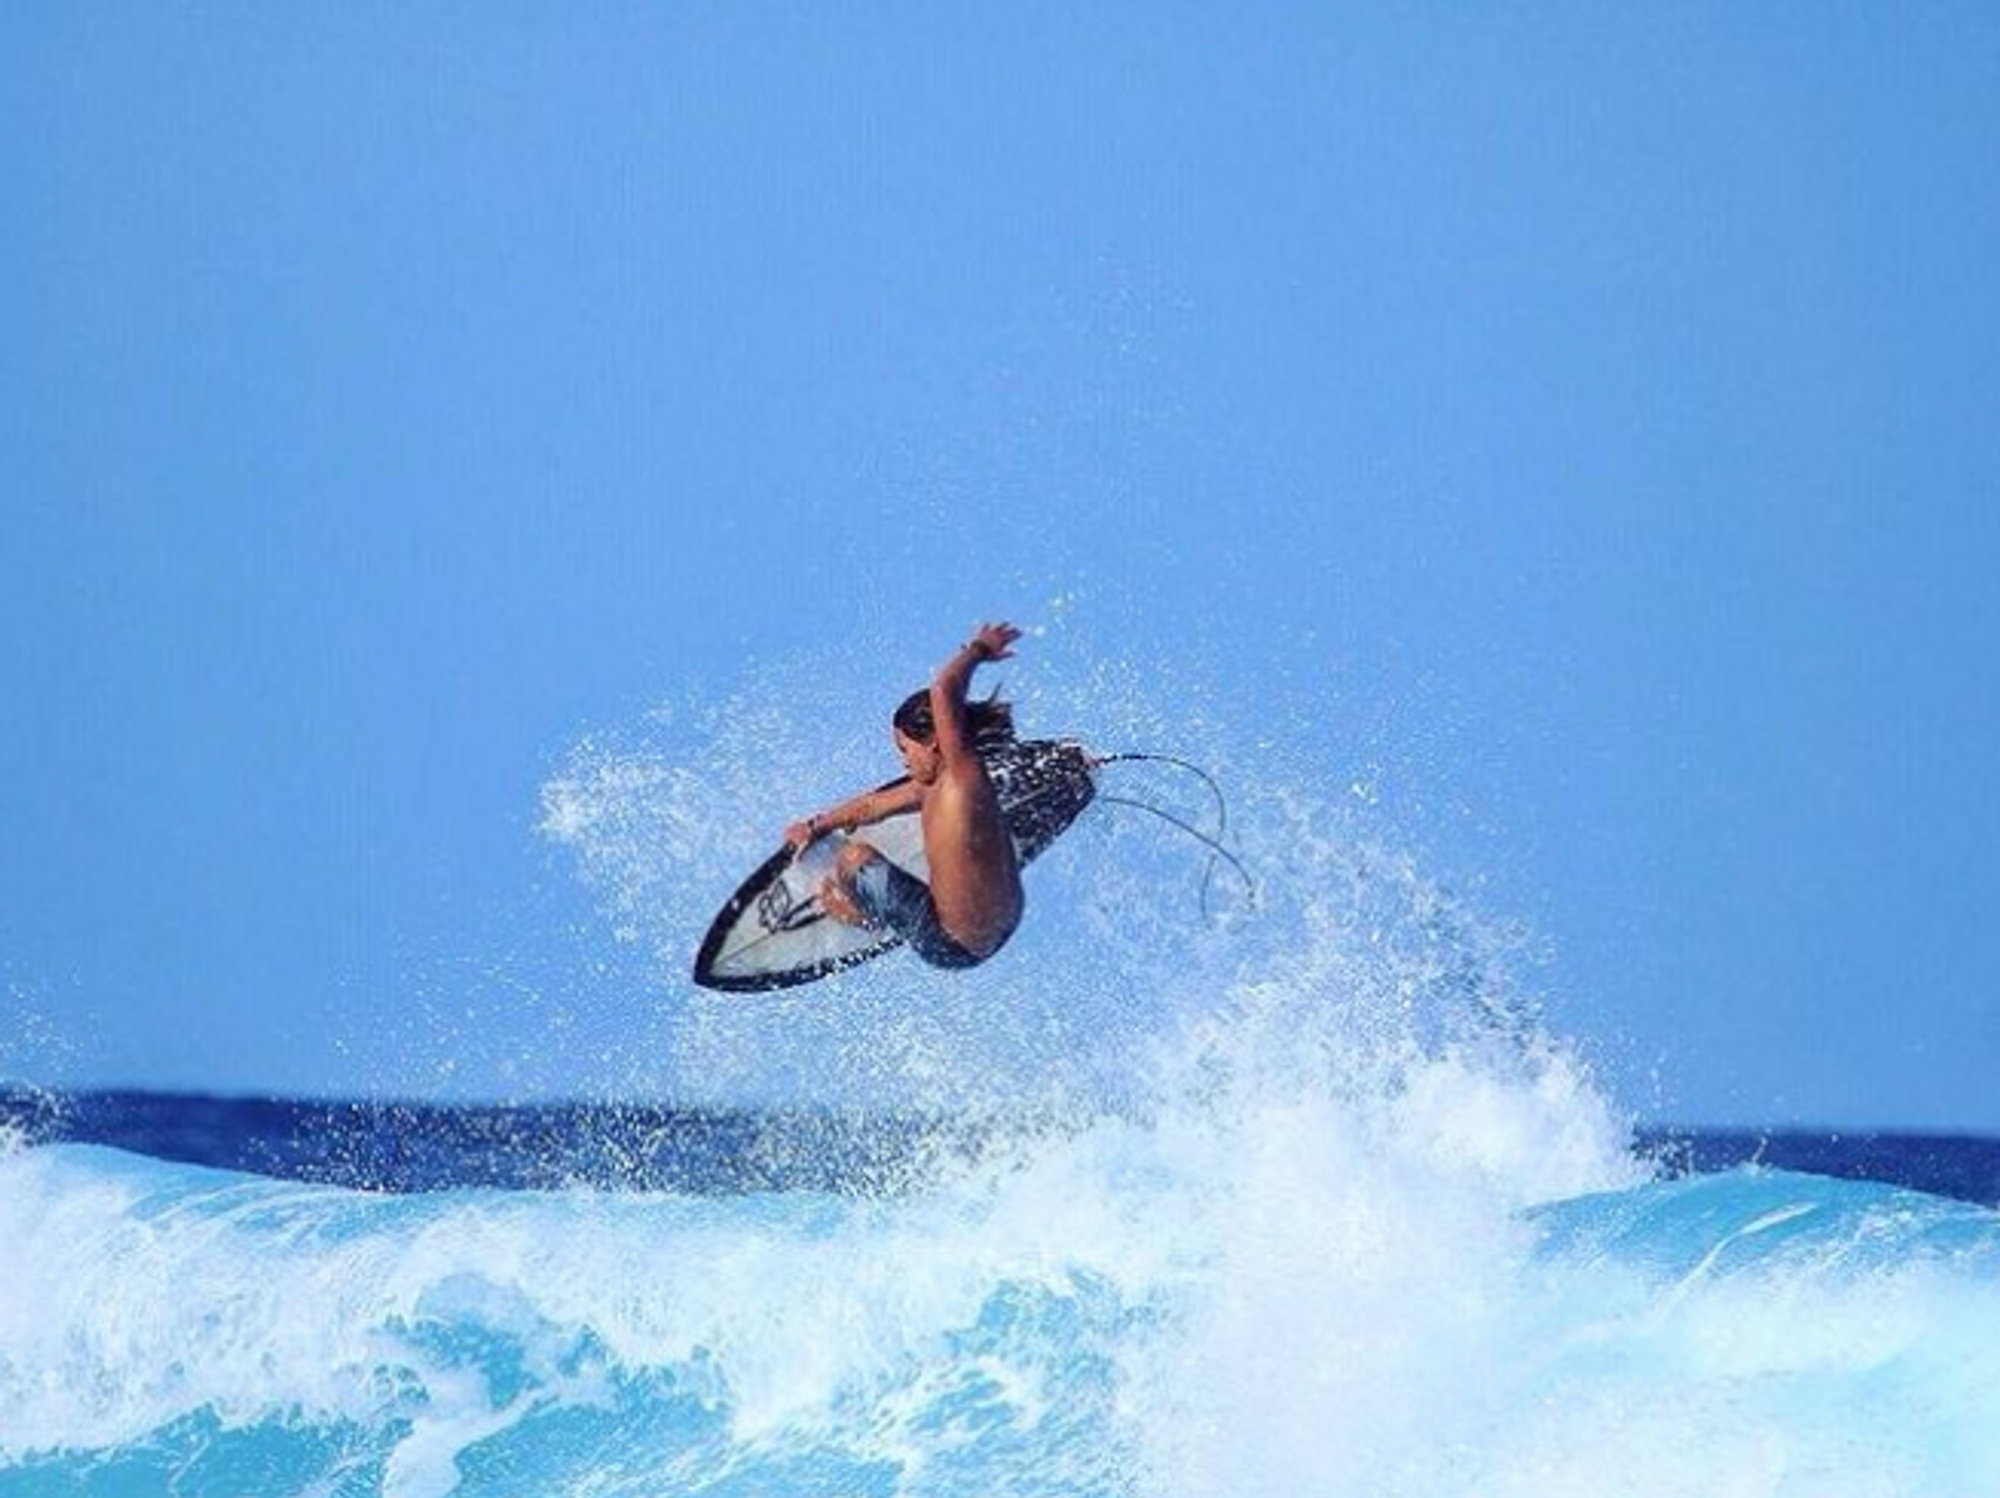 A surfer rides a wave with his hand in the air.